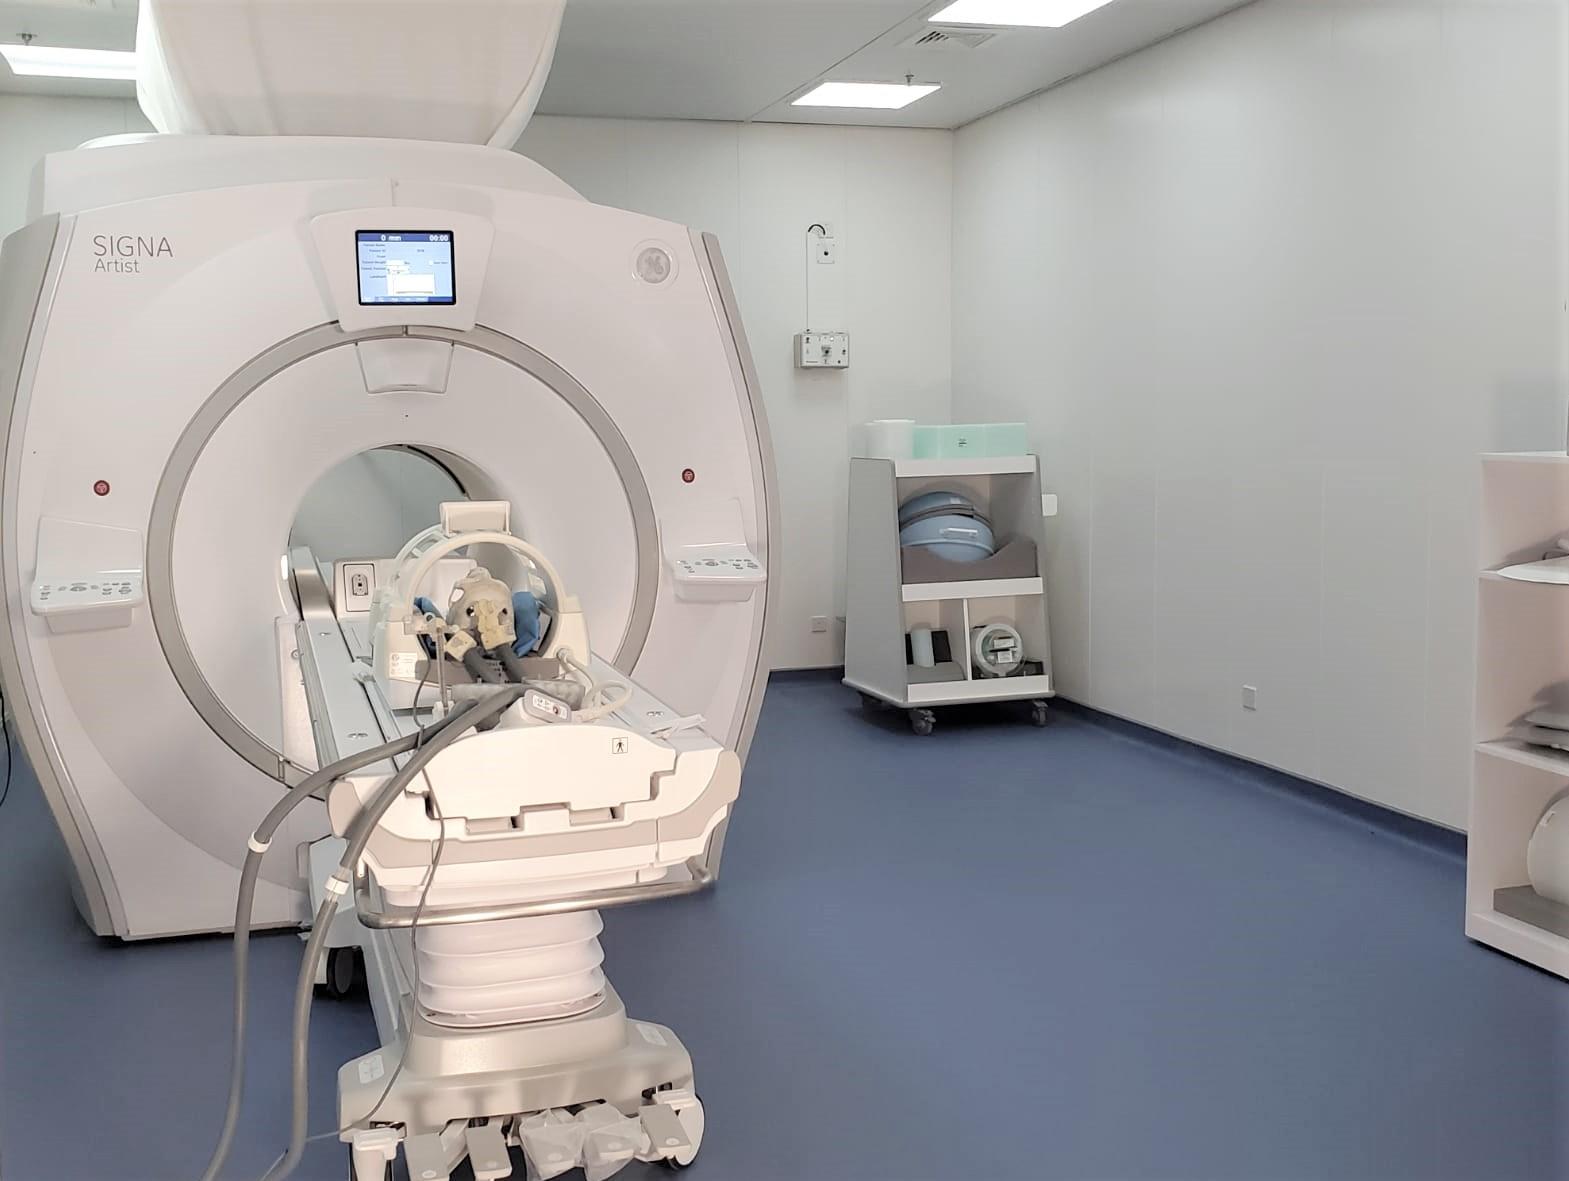 High Performance Robotic Systems for Intraoperative MRI-guided Interventions